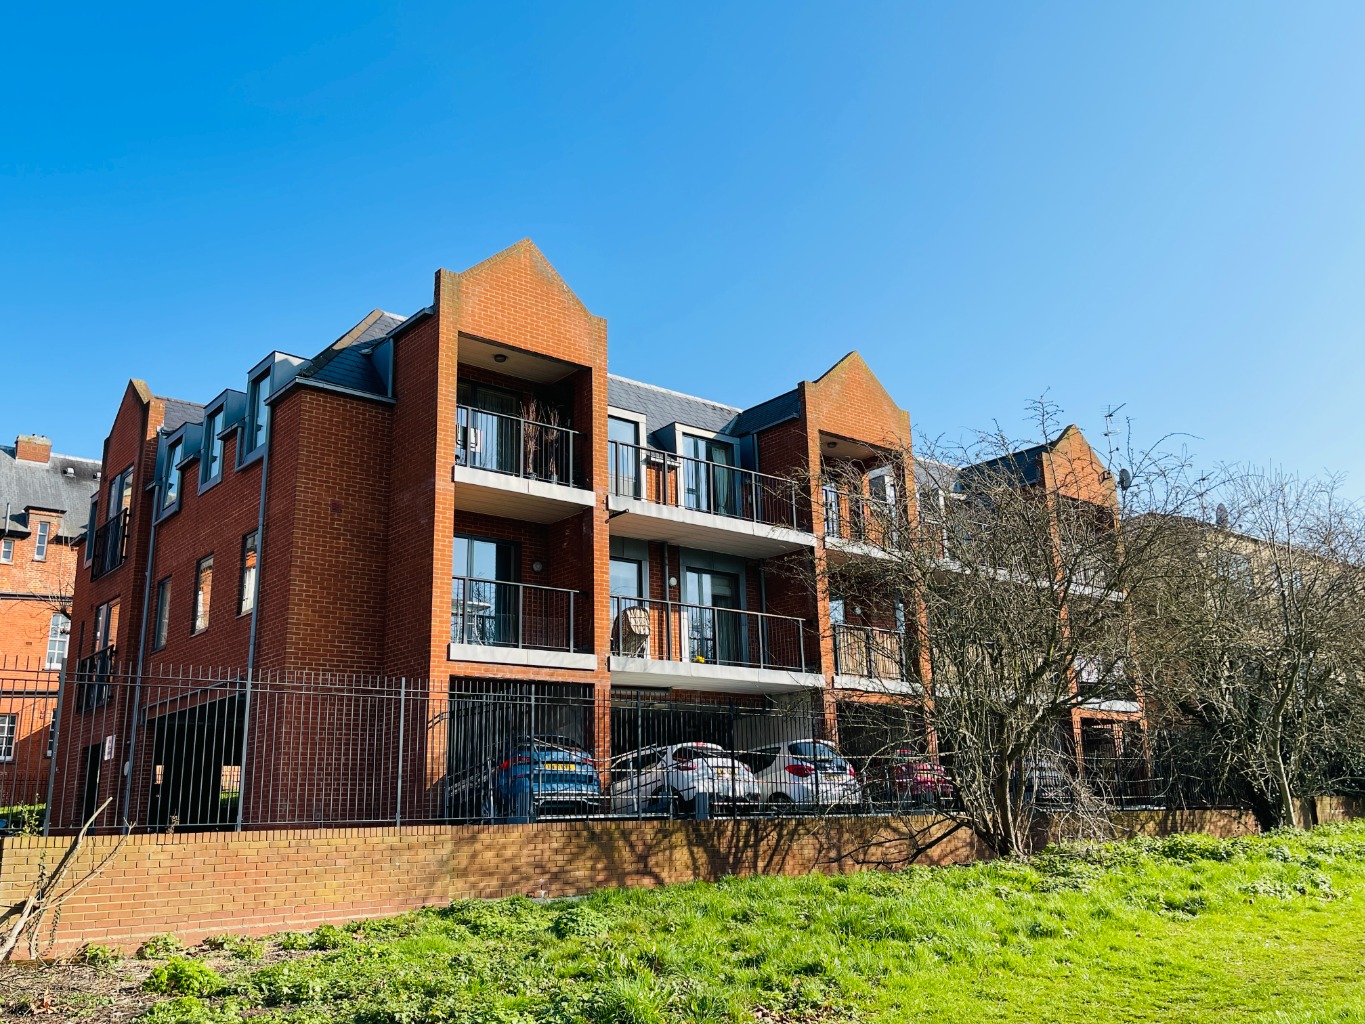 70% Shared ownership:  Beaumont Gibbs are offering for sale this lovely two double bedroomed first floor purpose built flat for sale in a gated development. Situated on the Woolwich & Eltham borders, this property is offered in excellent decorative condition.